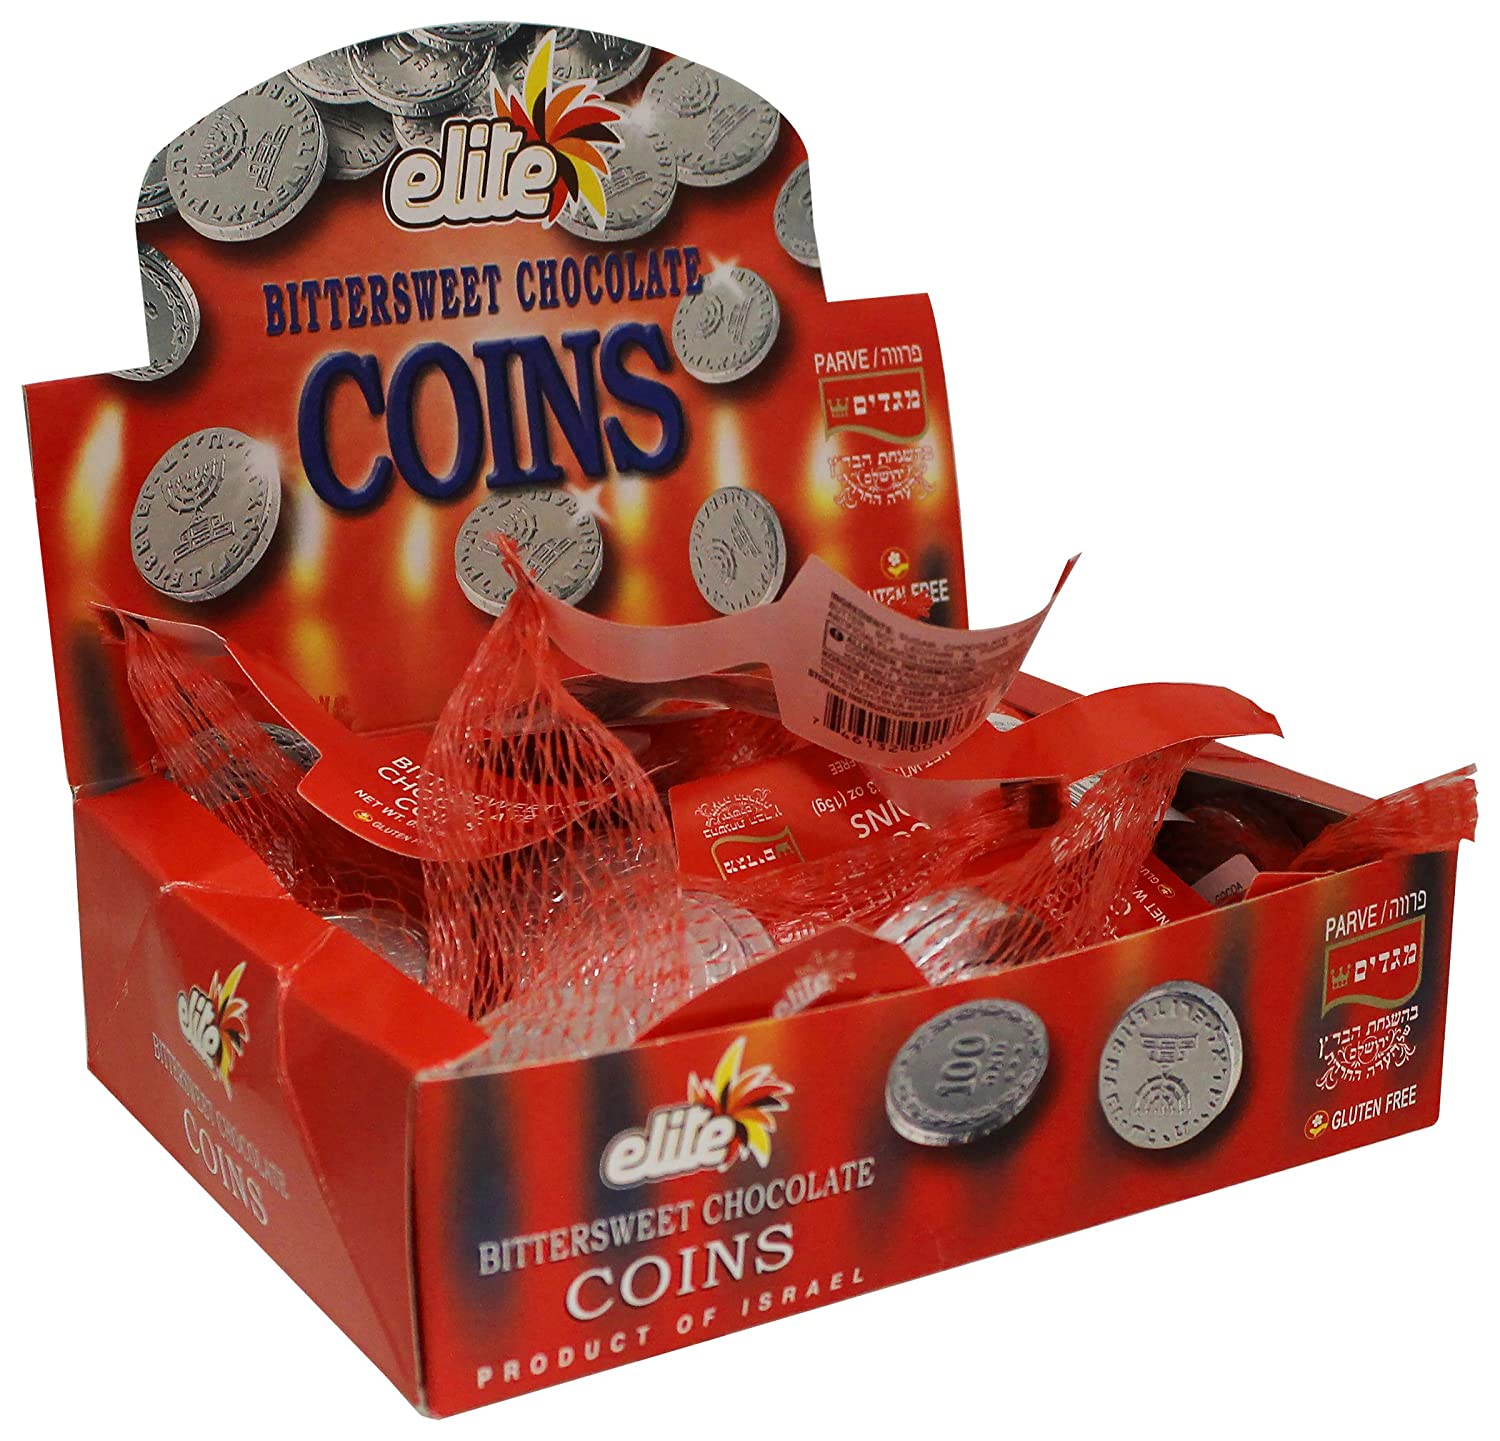 (24 Pack) Elite Bittersweet Chocolate coin - image 2 of 3